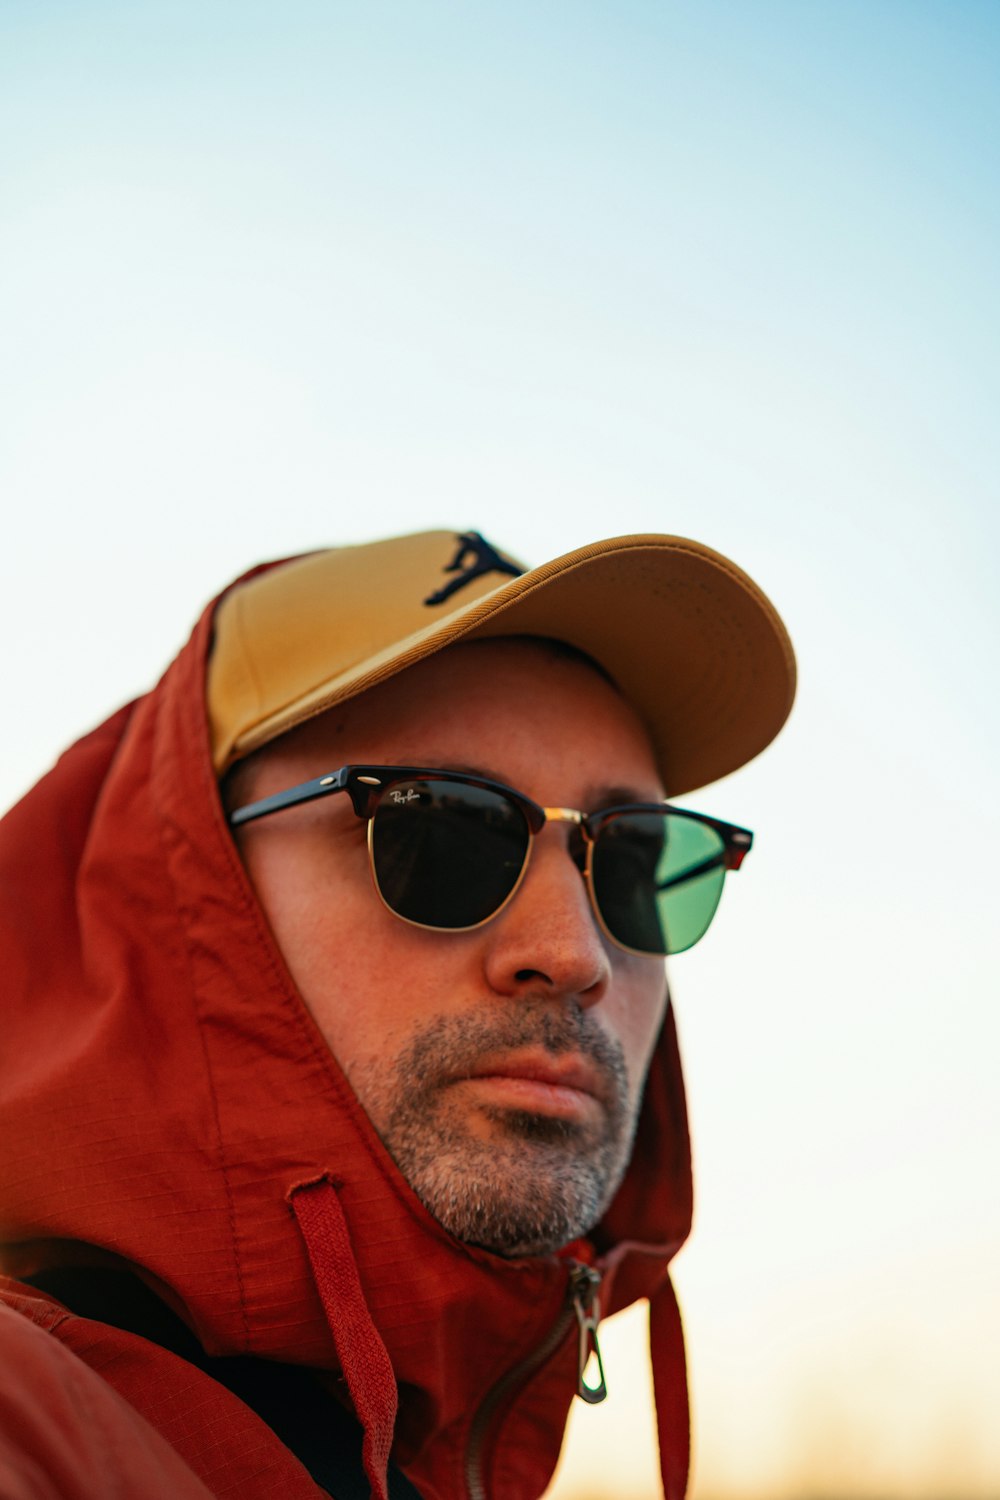 a man wearing sunglasses and a red jacket